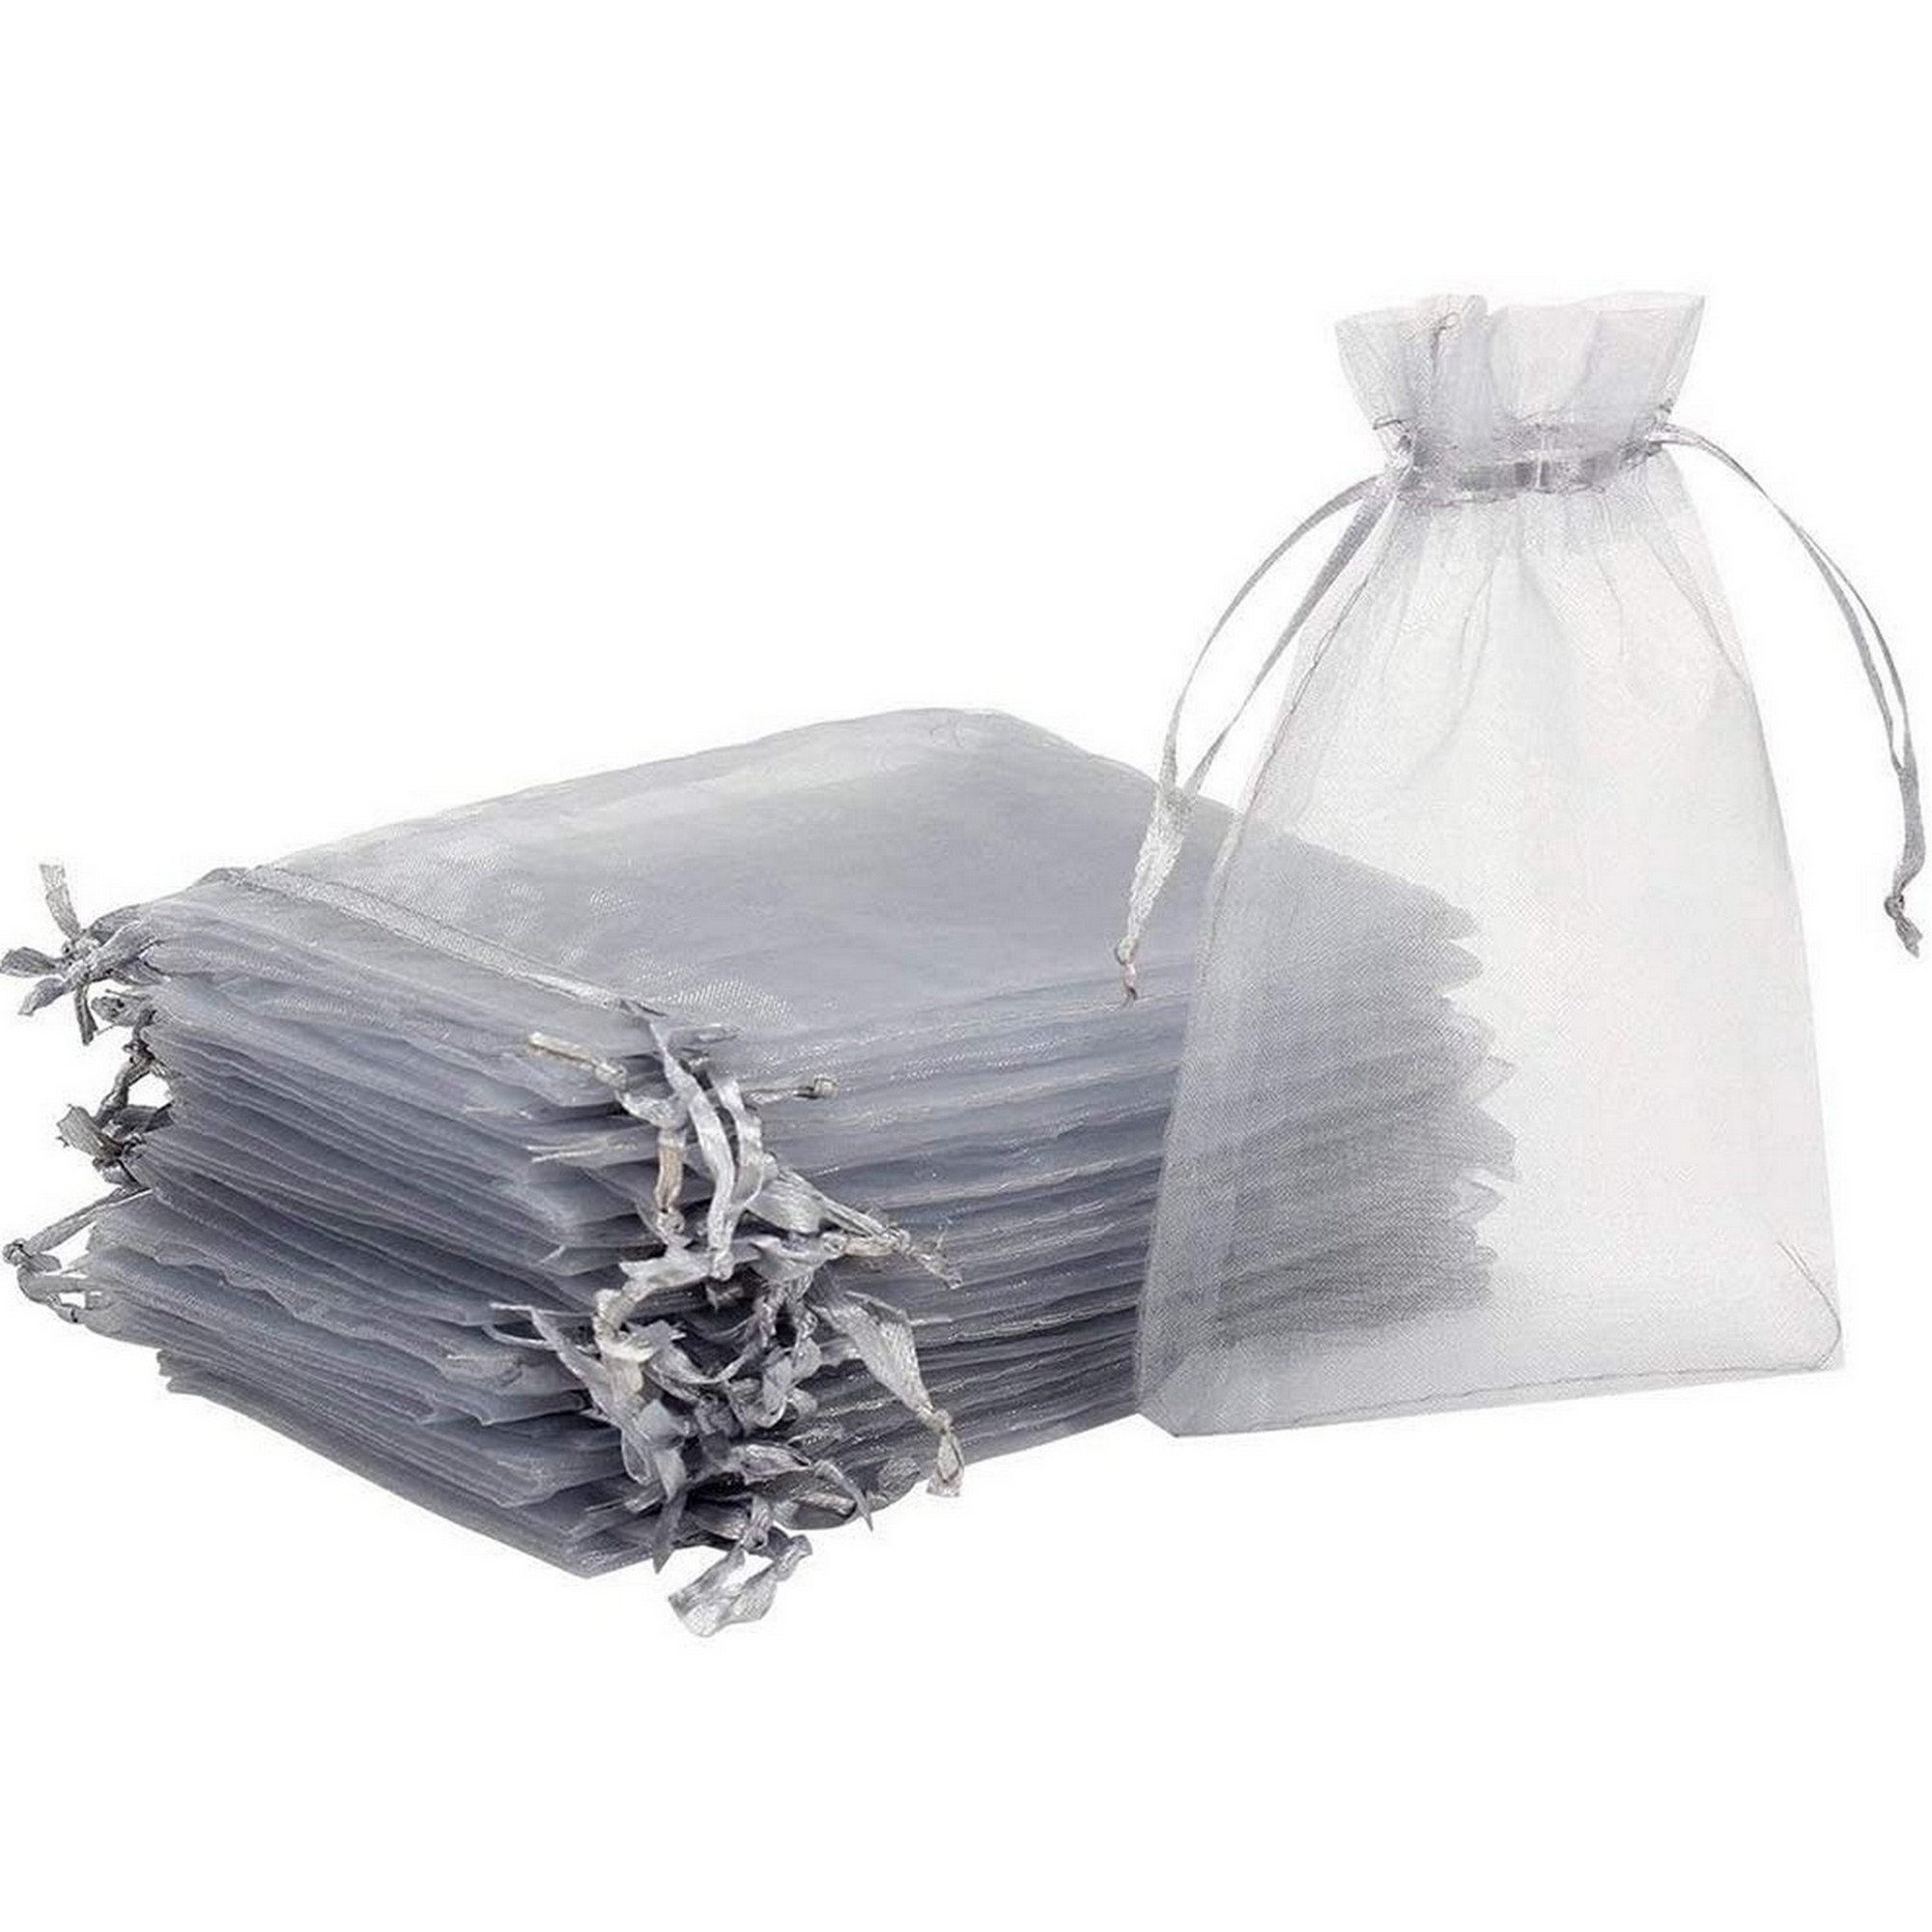 120sytles ORGANZA GISE BAG Candy Sheer Jewellery Pouch Wedding Birthday Pa S,ANI 